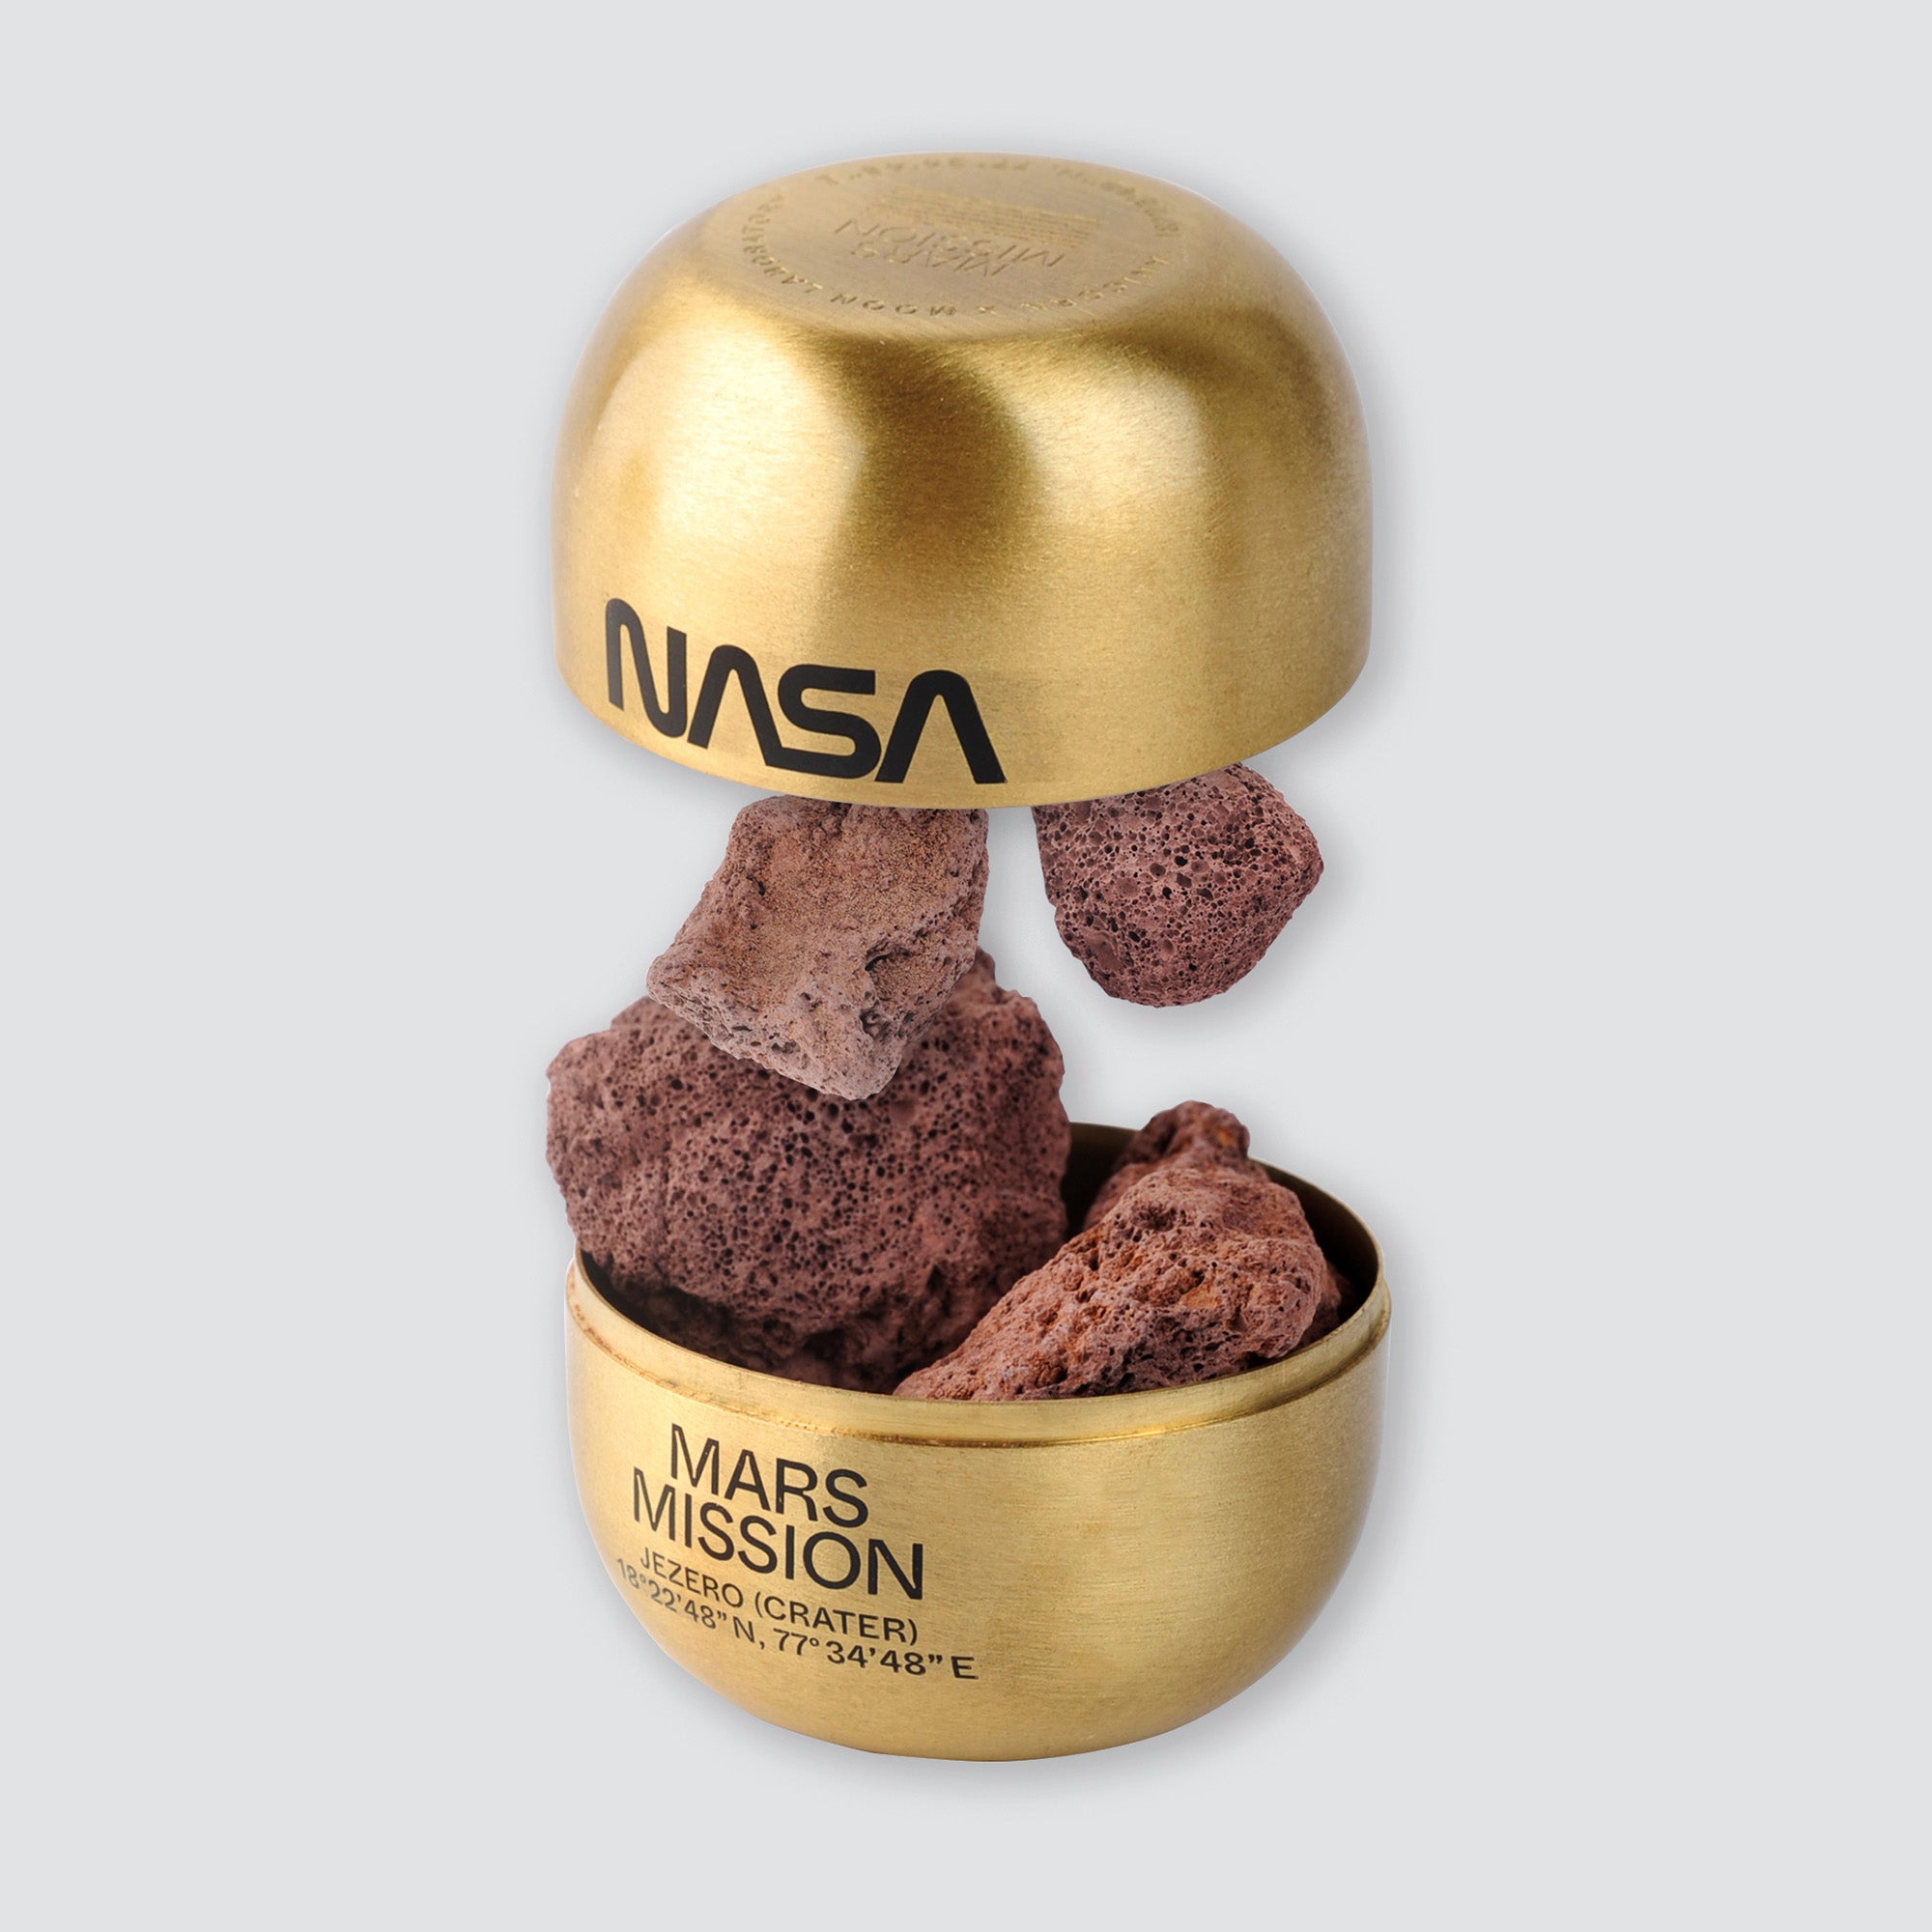 The Mars Scent is a scented potpourri with an imaginary aroma of Mars, it comes with a special brass capsule with NASA logo print. A collaboration with Moon Laboratory.